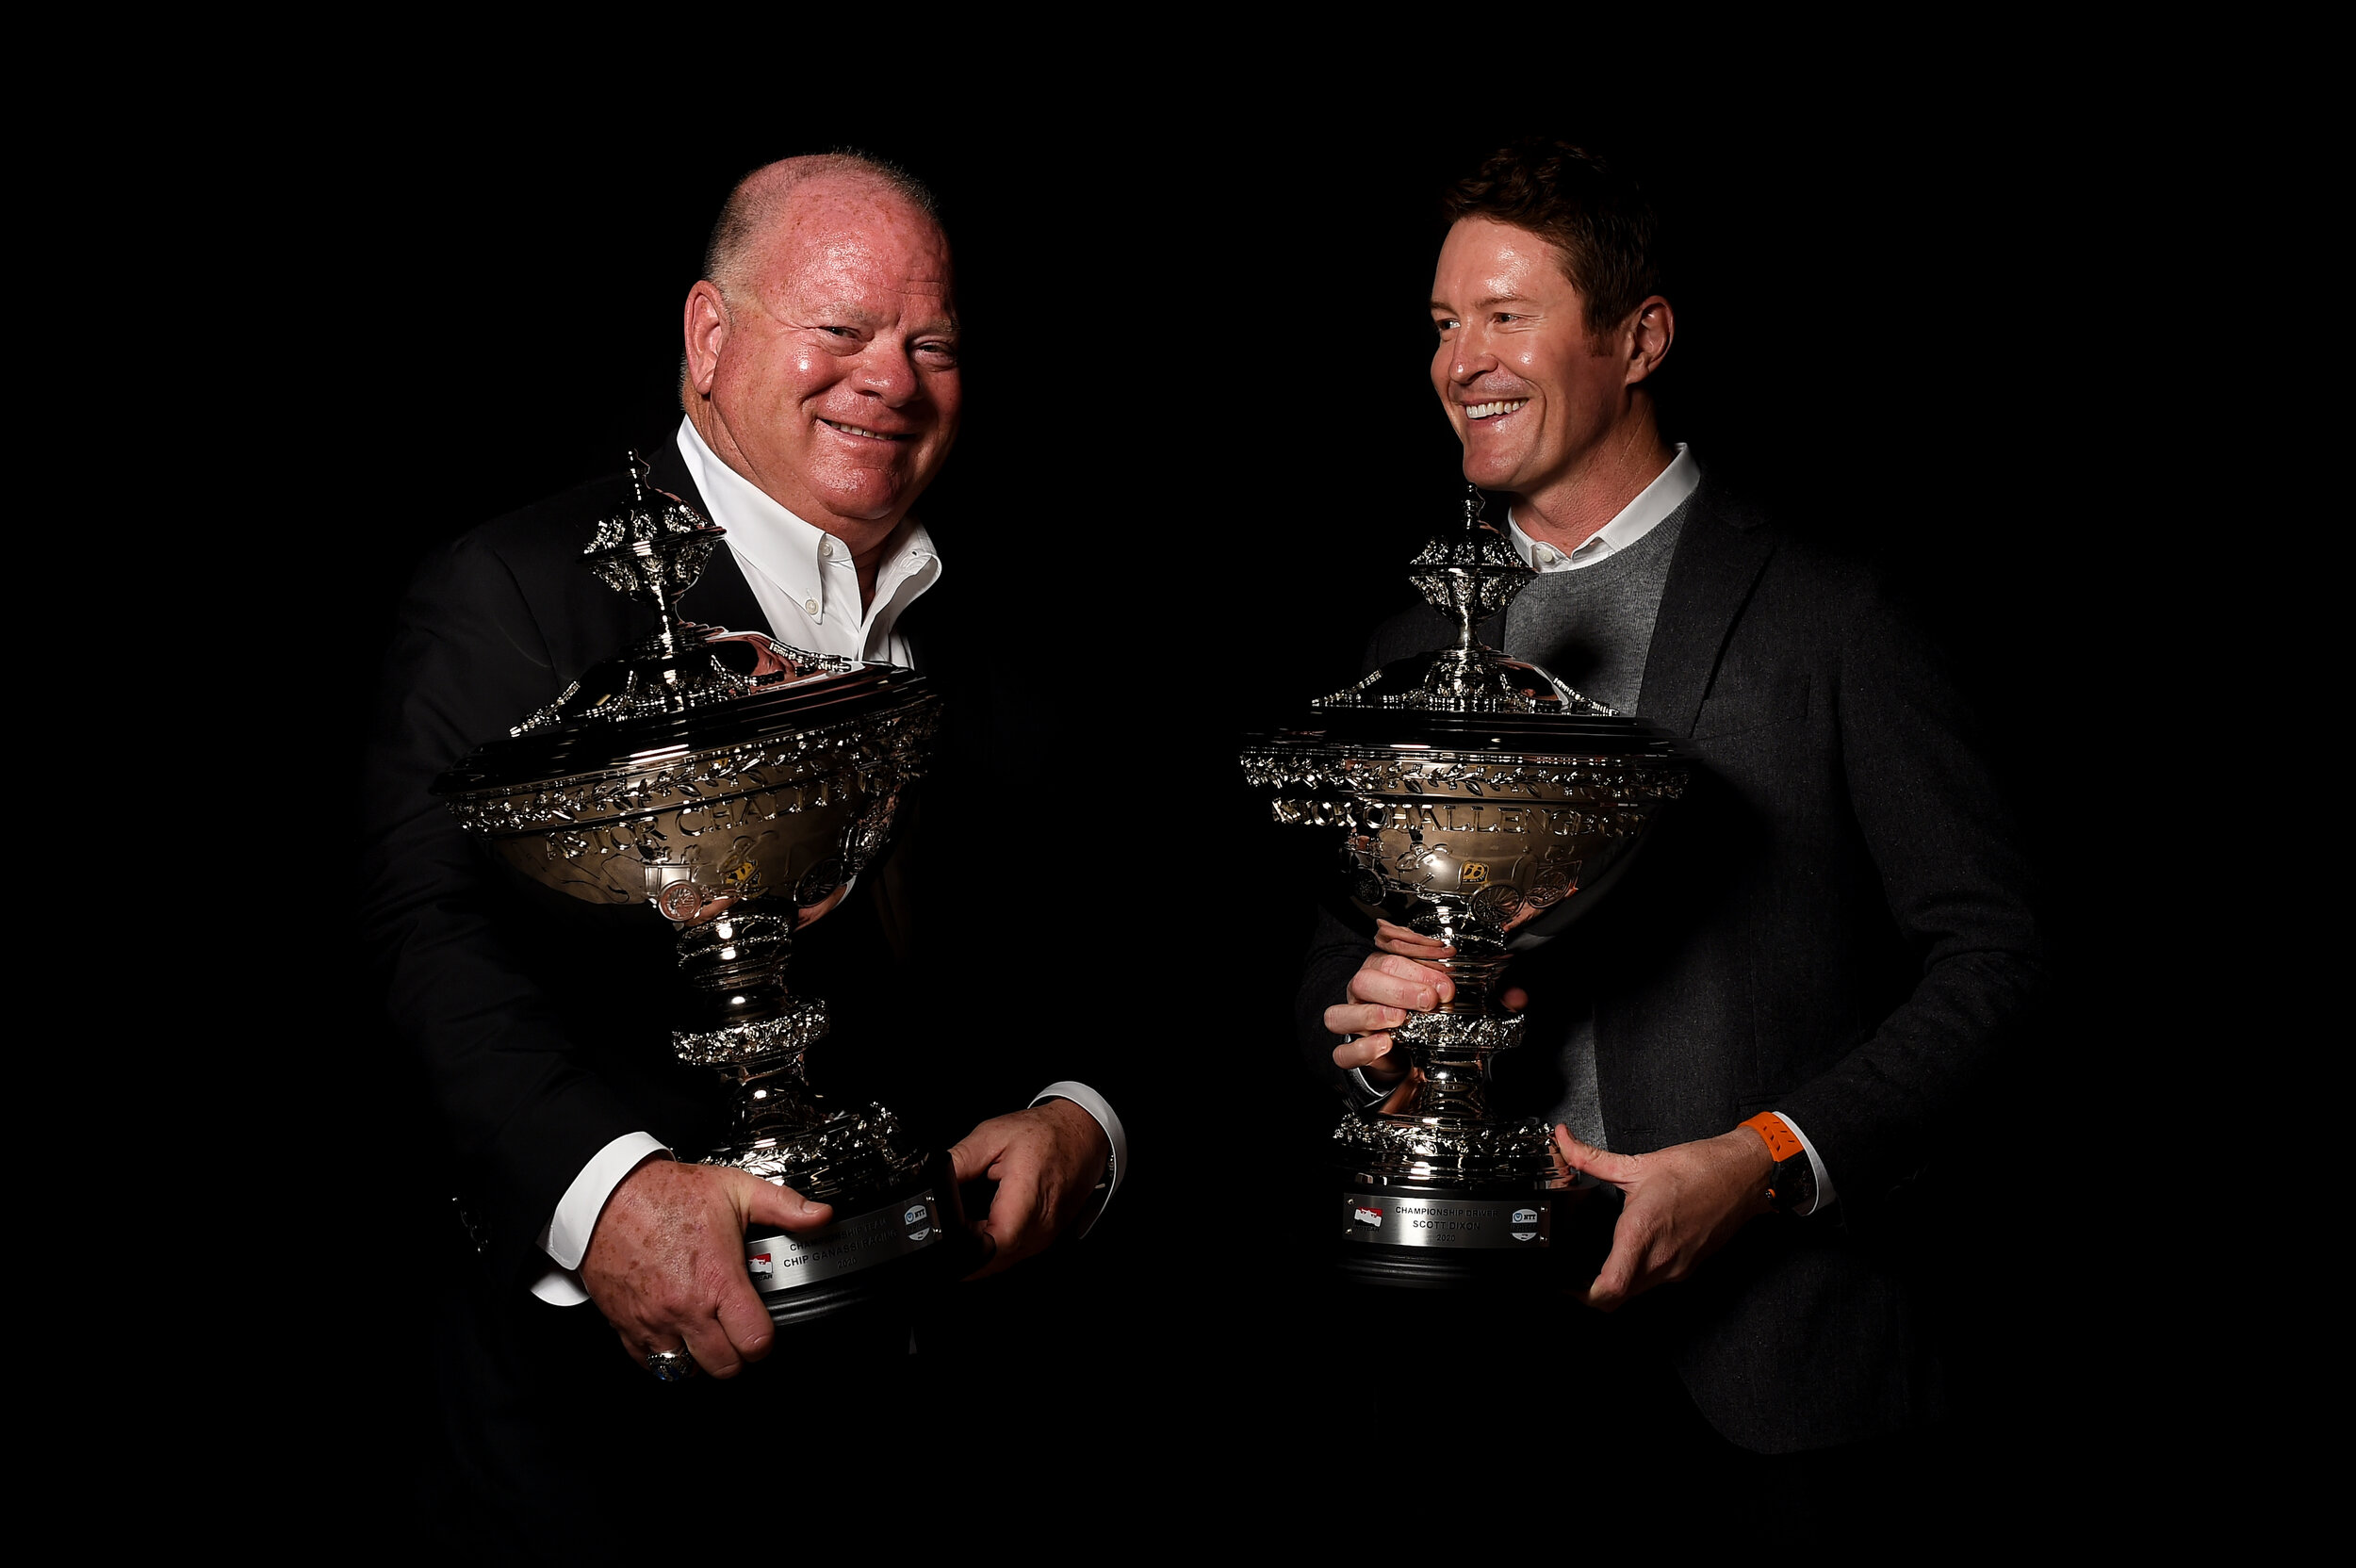  Chip Ganassi and Scott Dixon share a smile after being awarded Astor Cup replicas to commemorate the 2020 IndyCar championship victory.  